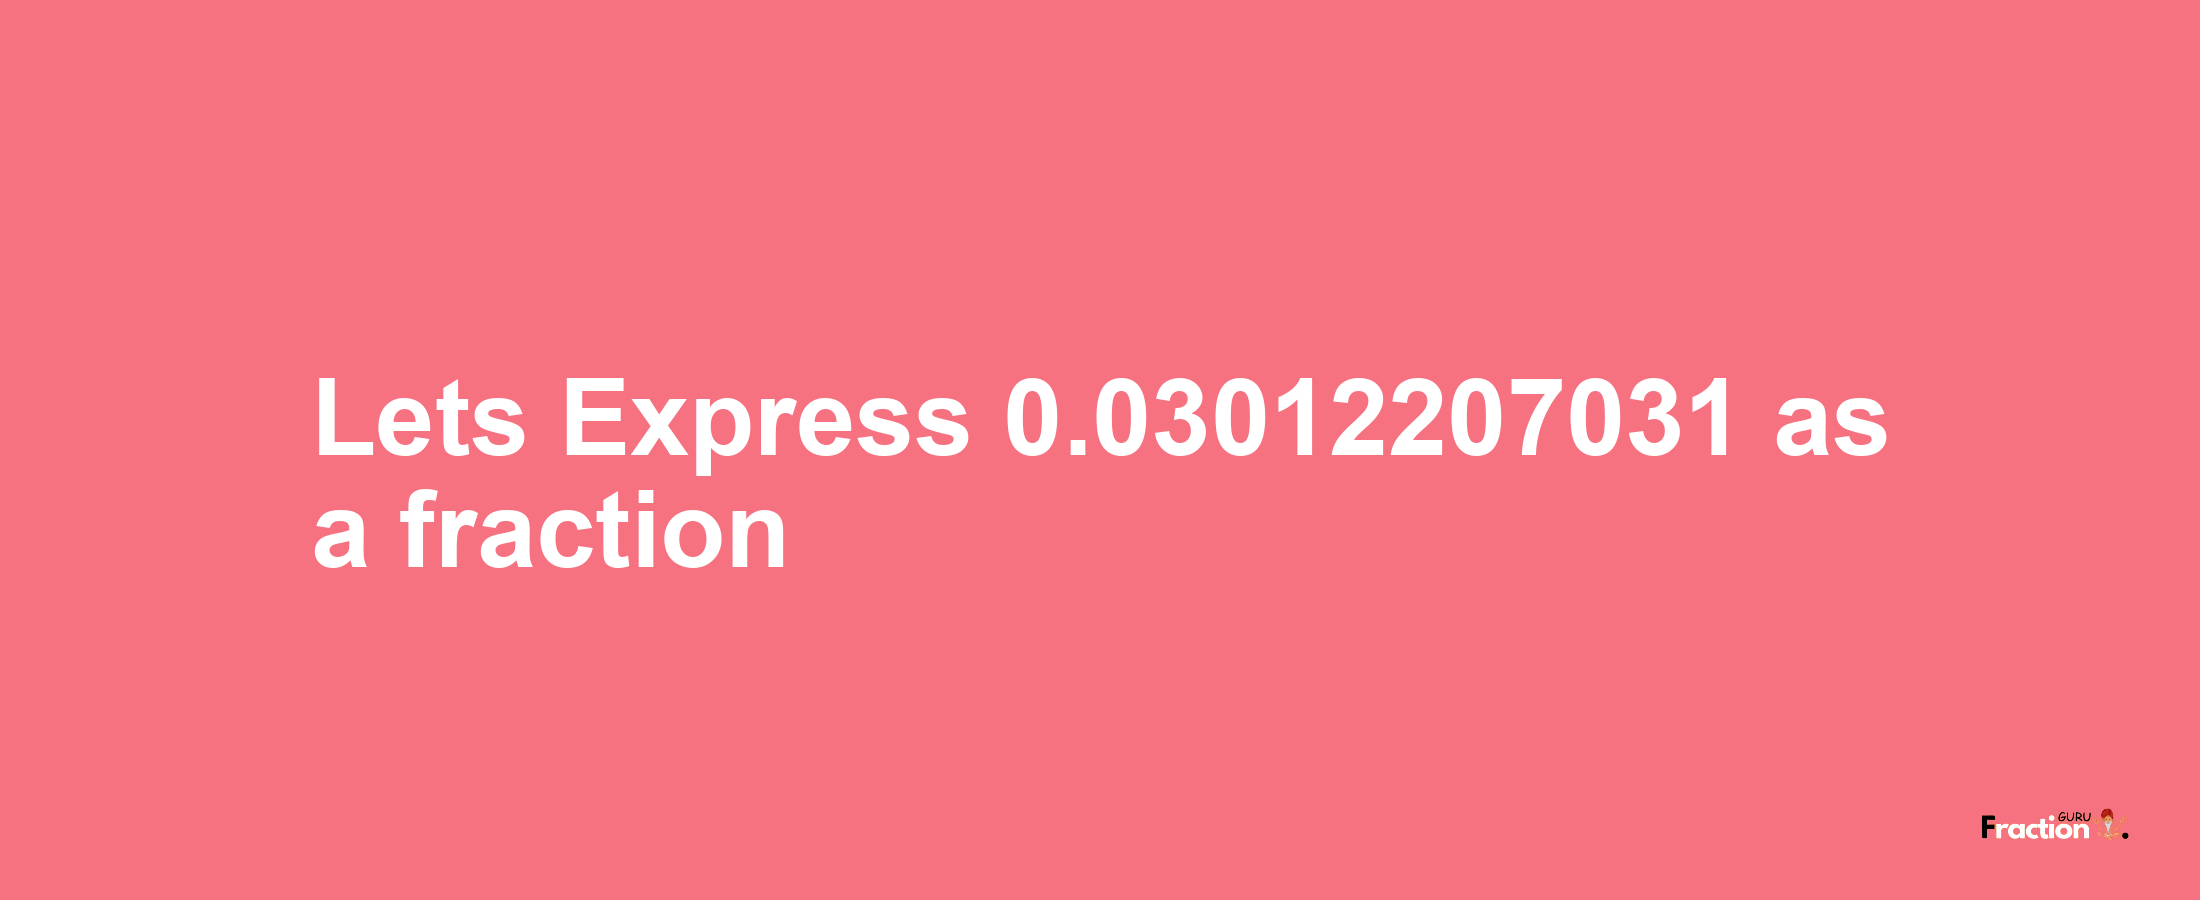 Lets Express 0.03012207031 as afraction